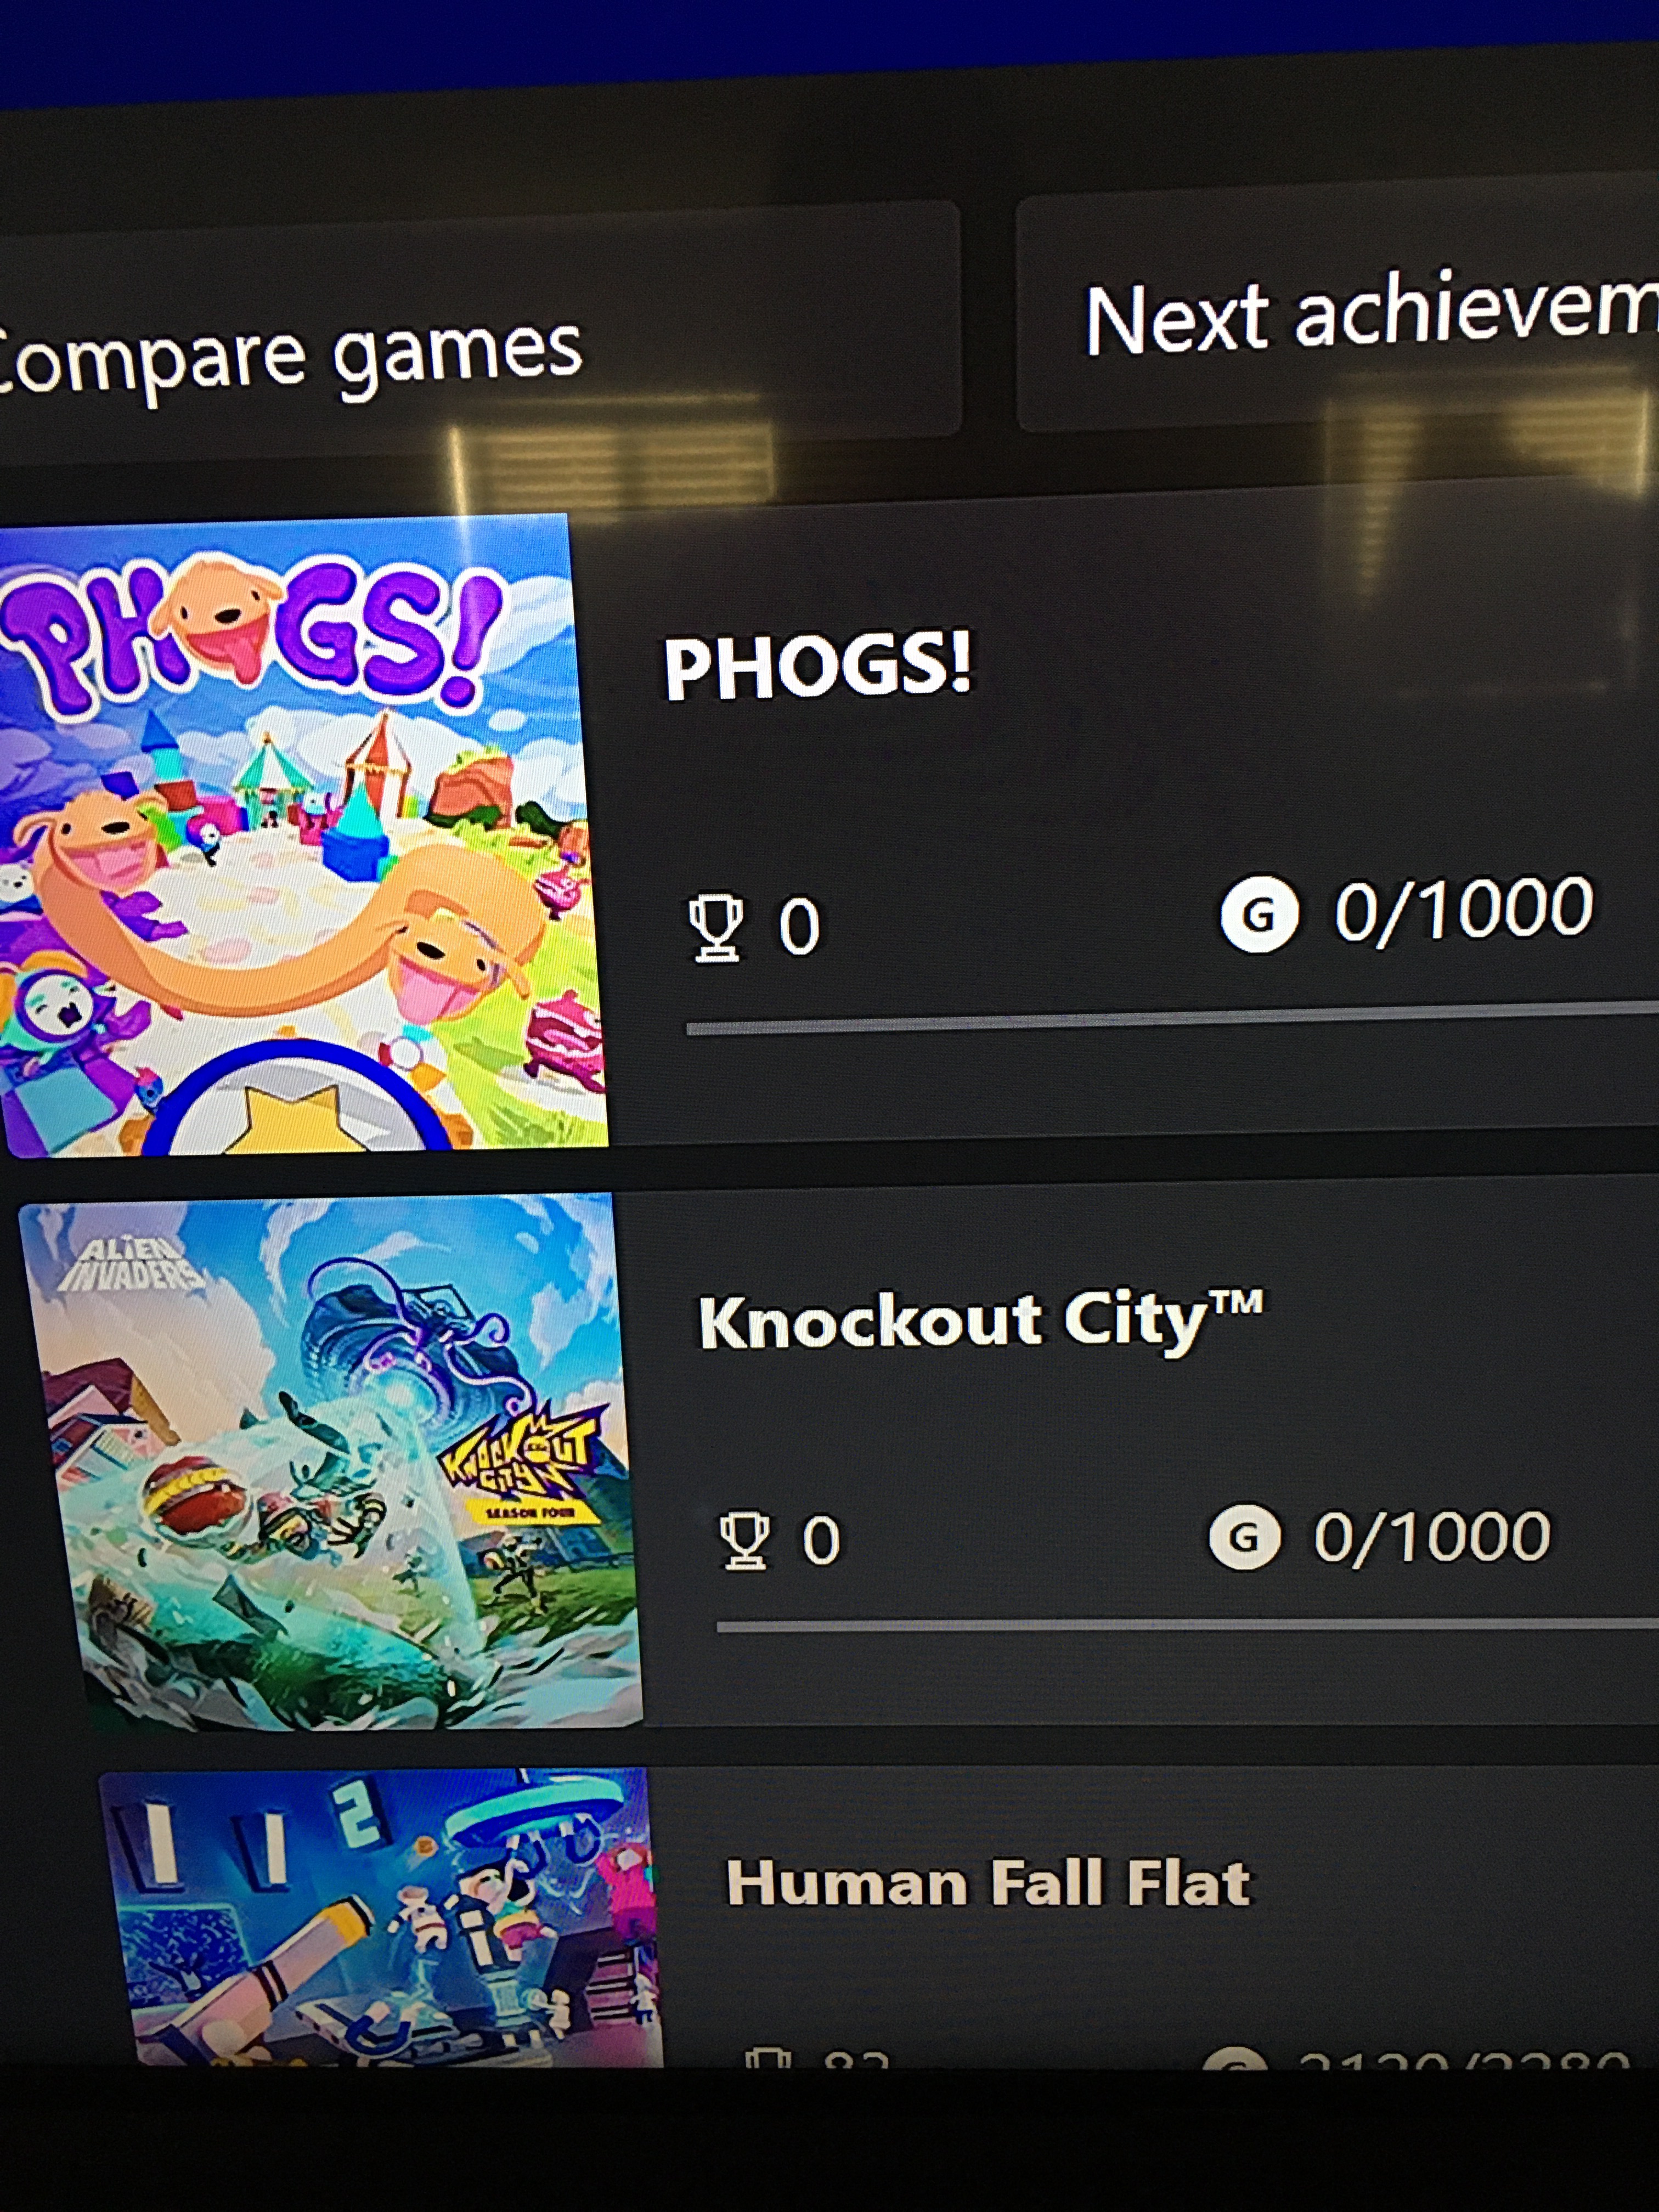 Achievements popping , adding to gamerscore but not showing as - Microsoft  Community